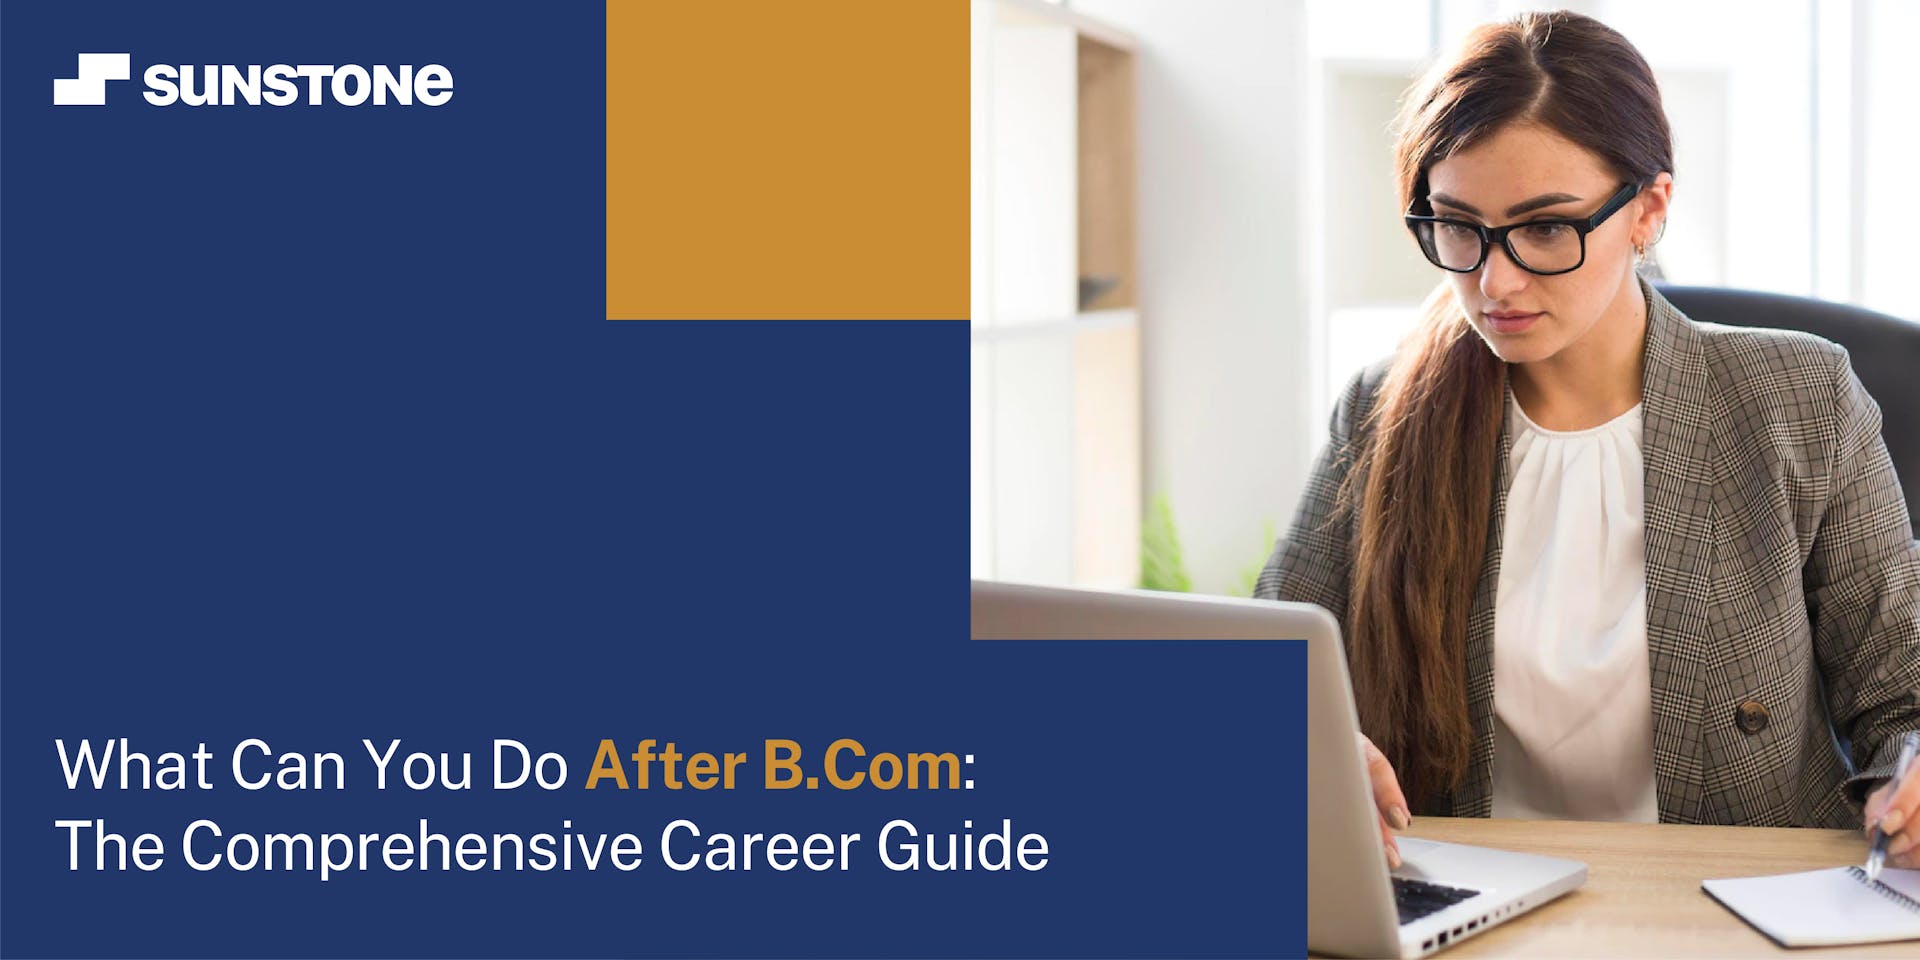 What Can You Do After B.Com?: The Comprehensive Career Guide